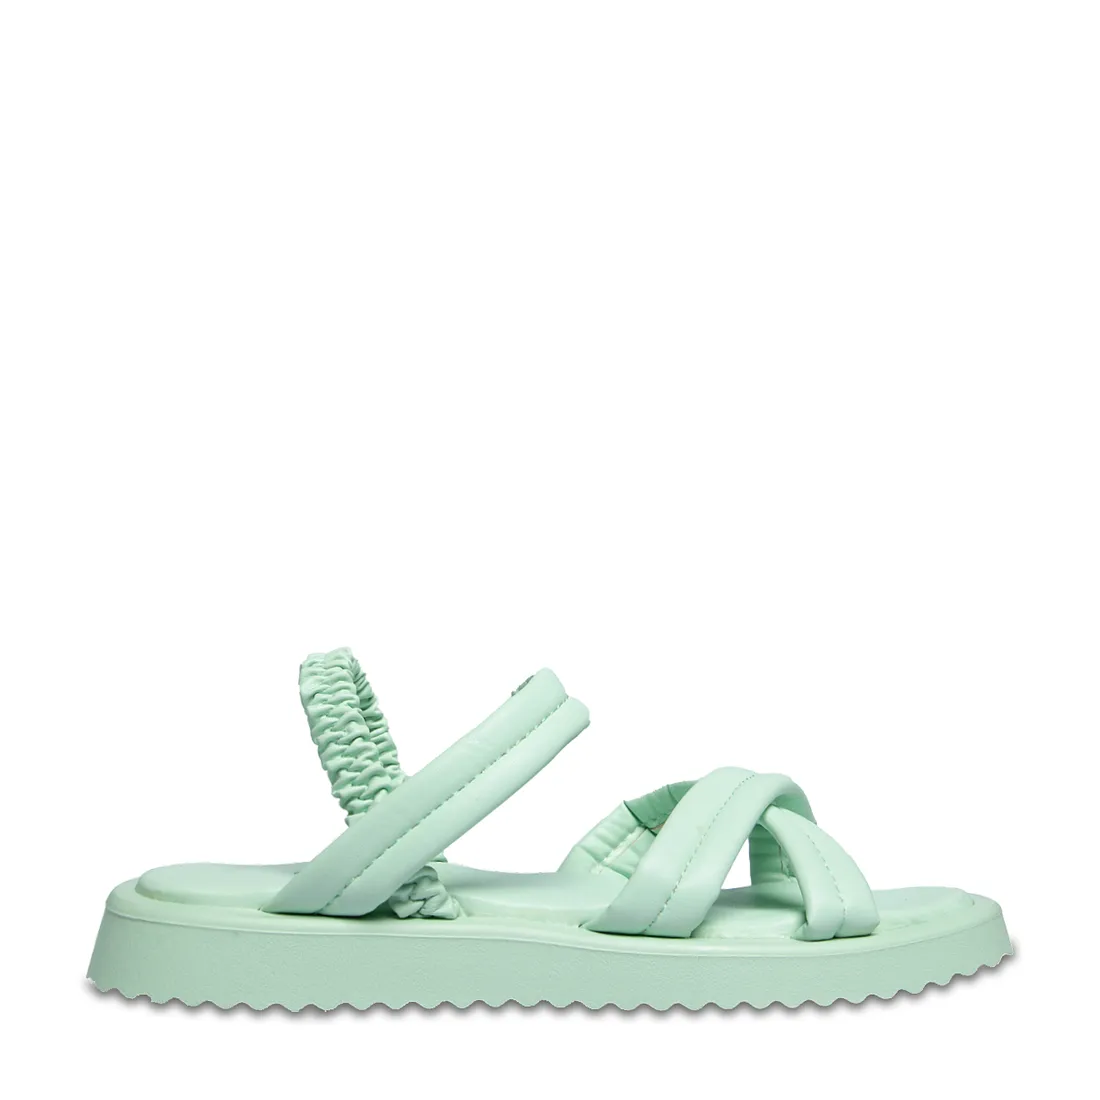 Puffy band strap sandal green - GIRLS 7-15 YEARS Shoes | Ackermans